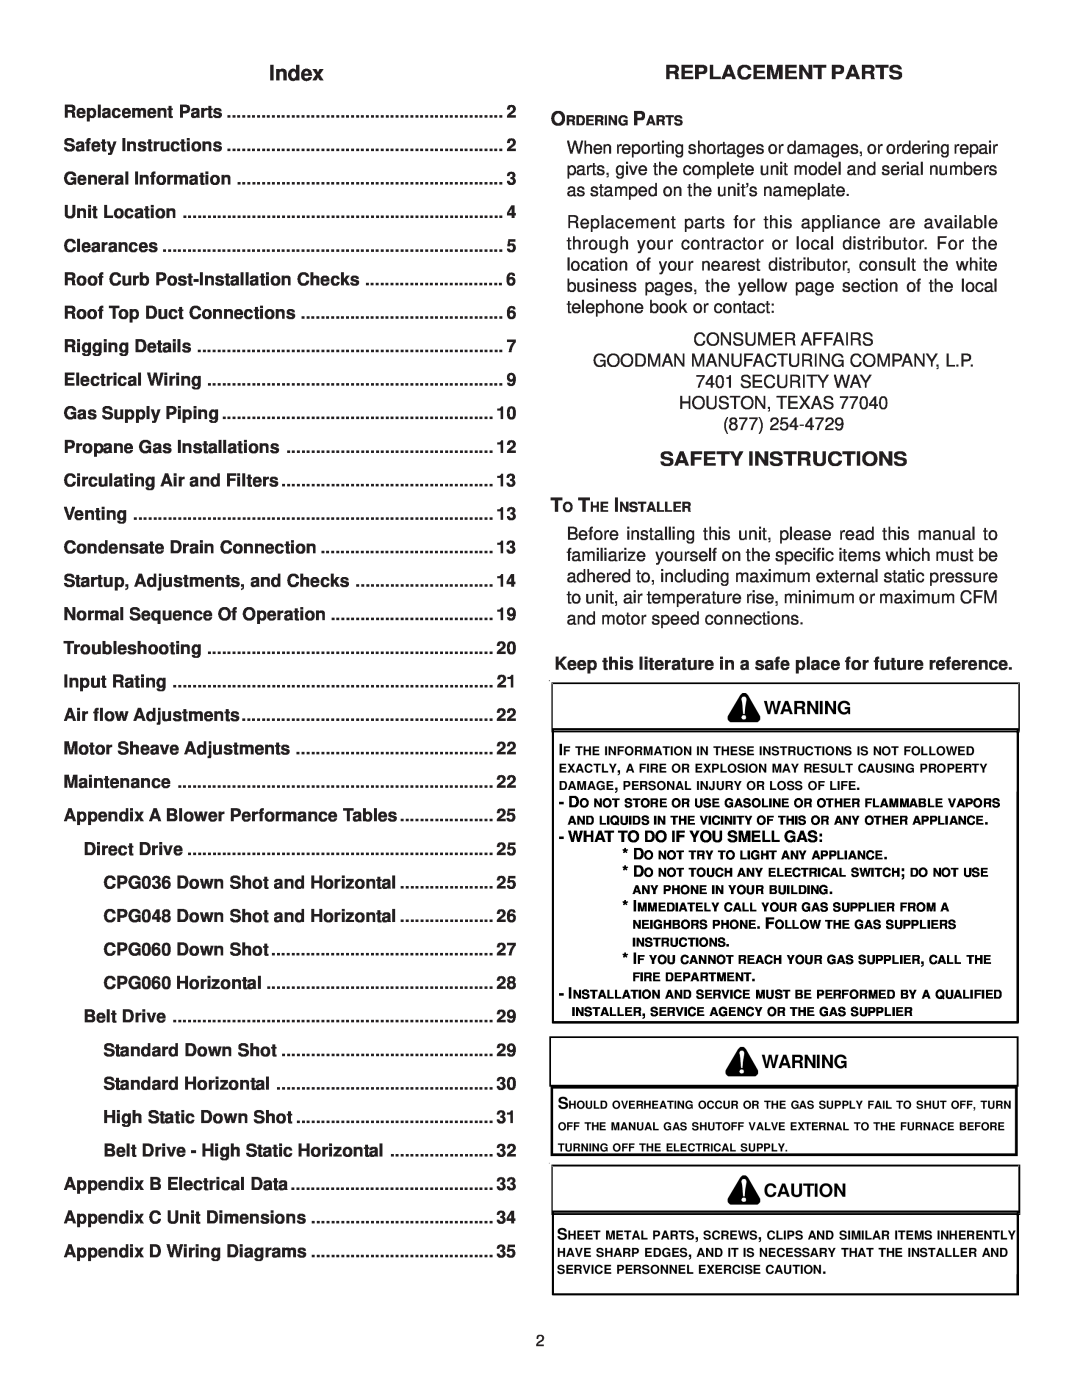 Goodman Mfg CPG SERIES installation manual Index, Replacement Parts, Safety Instructions 